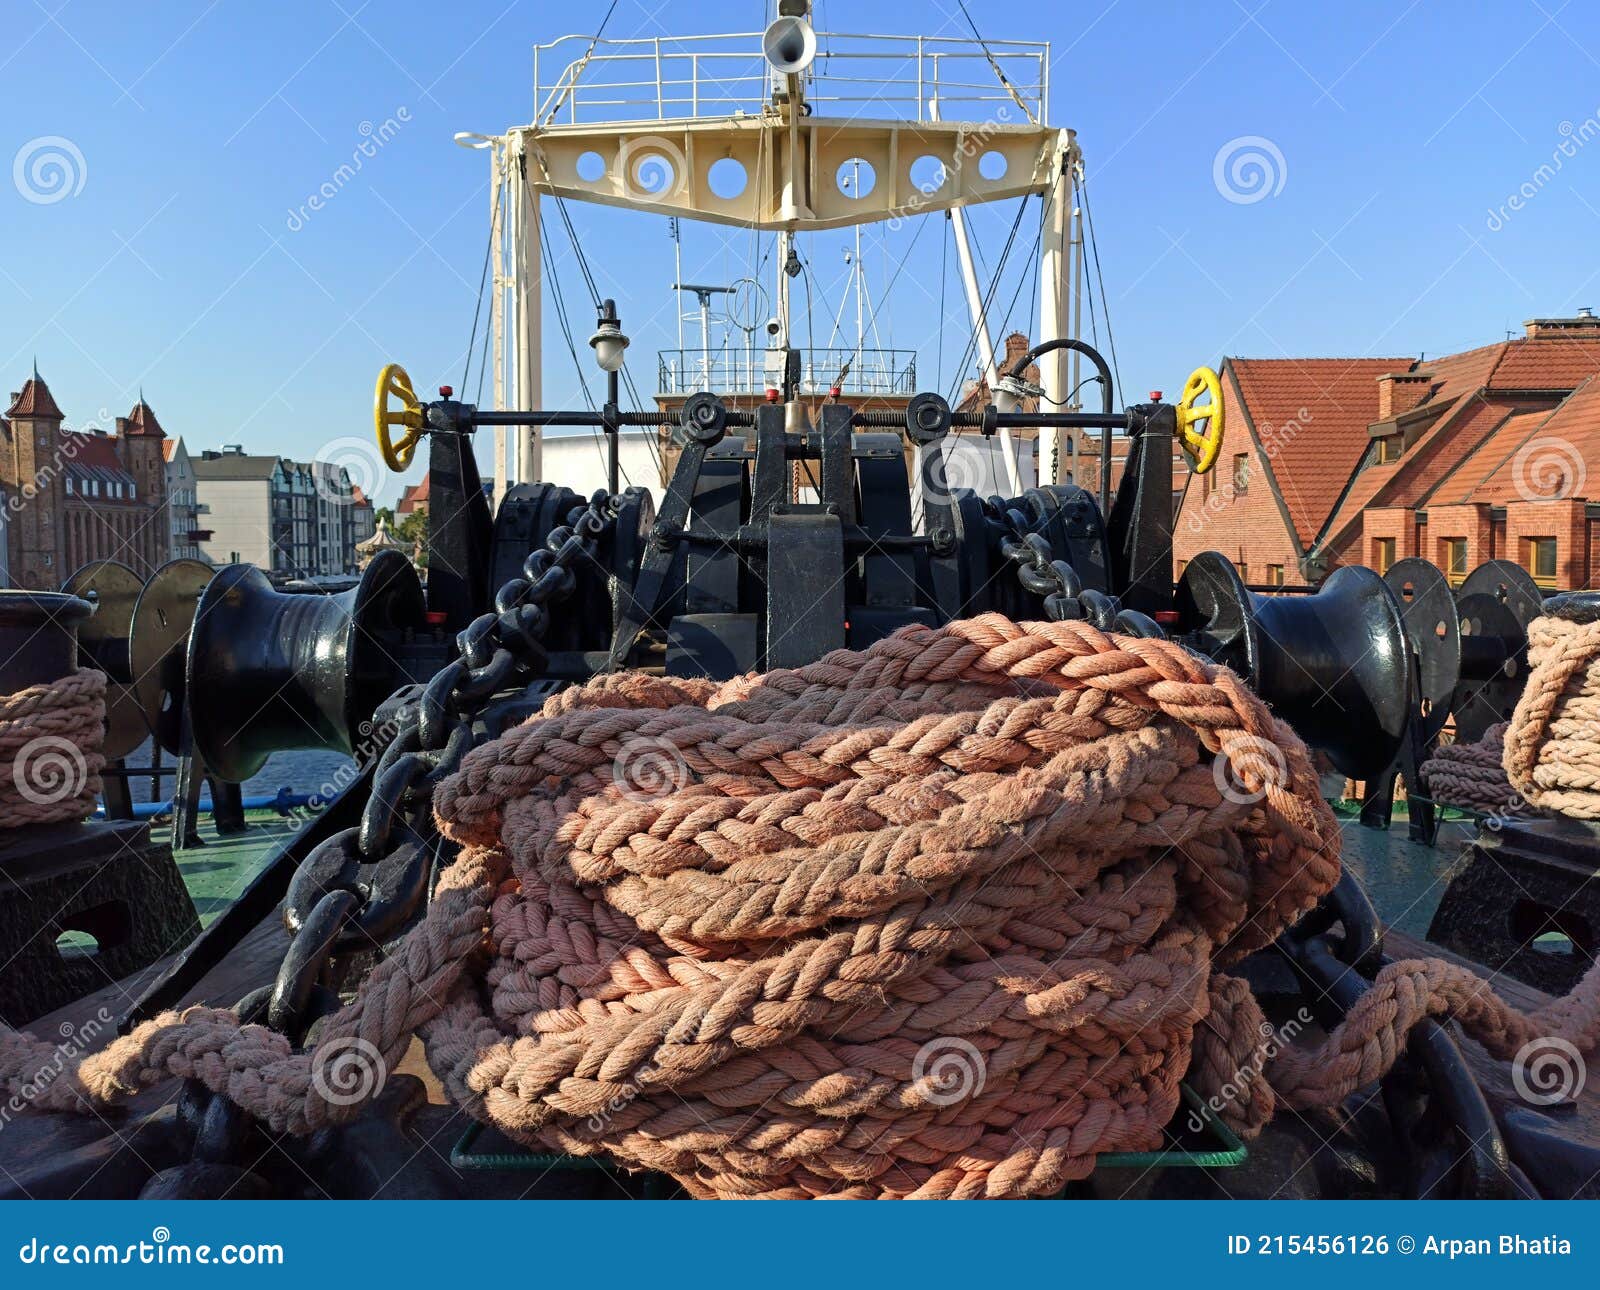 Gdansk, Poland - May 07, 2020: Large Thick Rope Used To Moor a